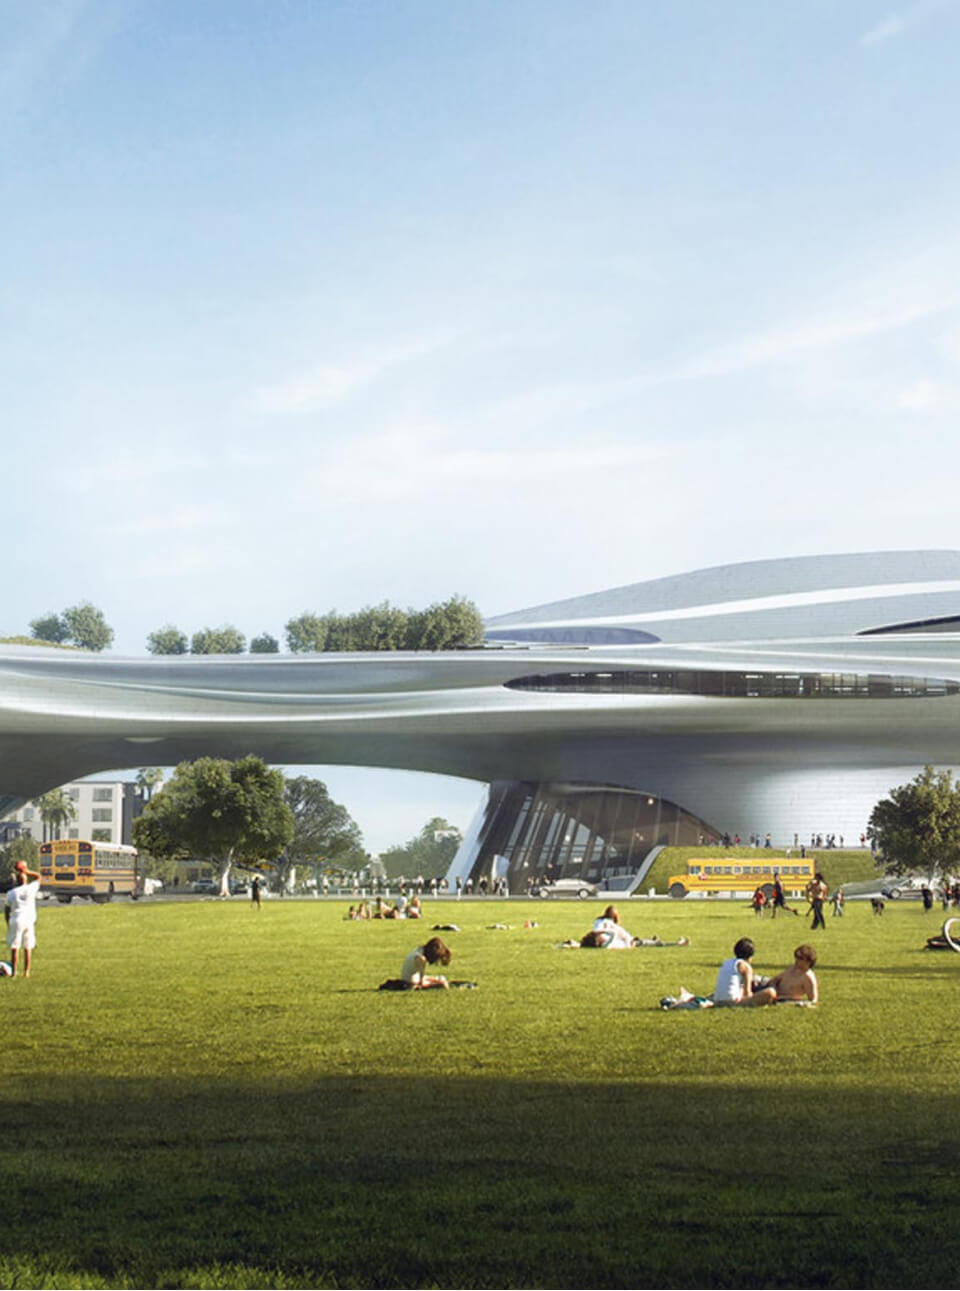 Cropped Image of the Lucas Museum of Narrative Art Design